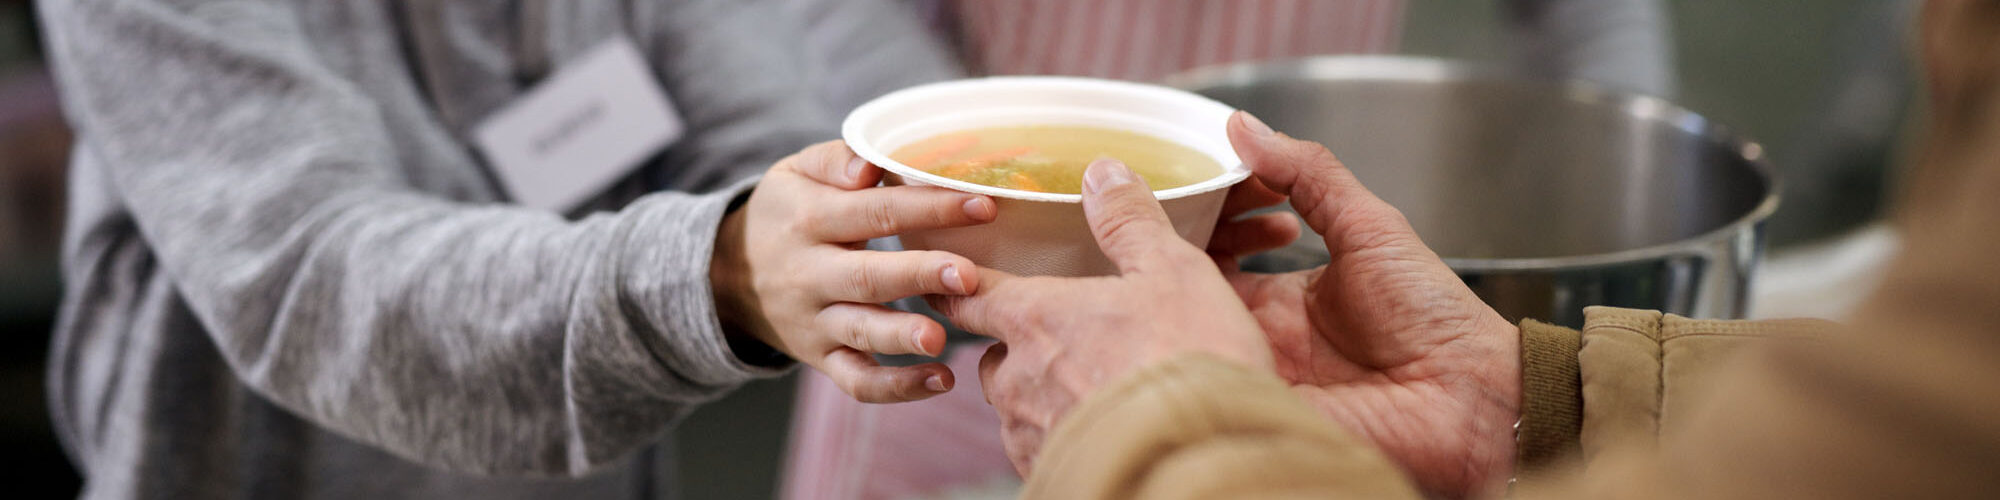 Volunteers,Serving,Hot,Soup,For,Homeless,In,Community,Charity,Donation